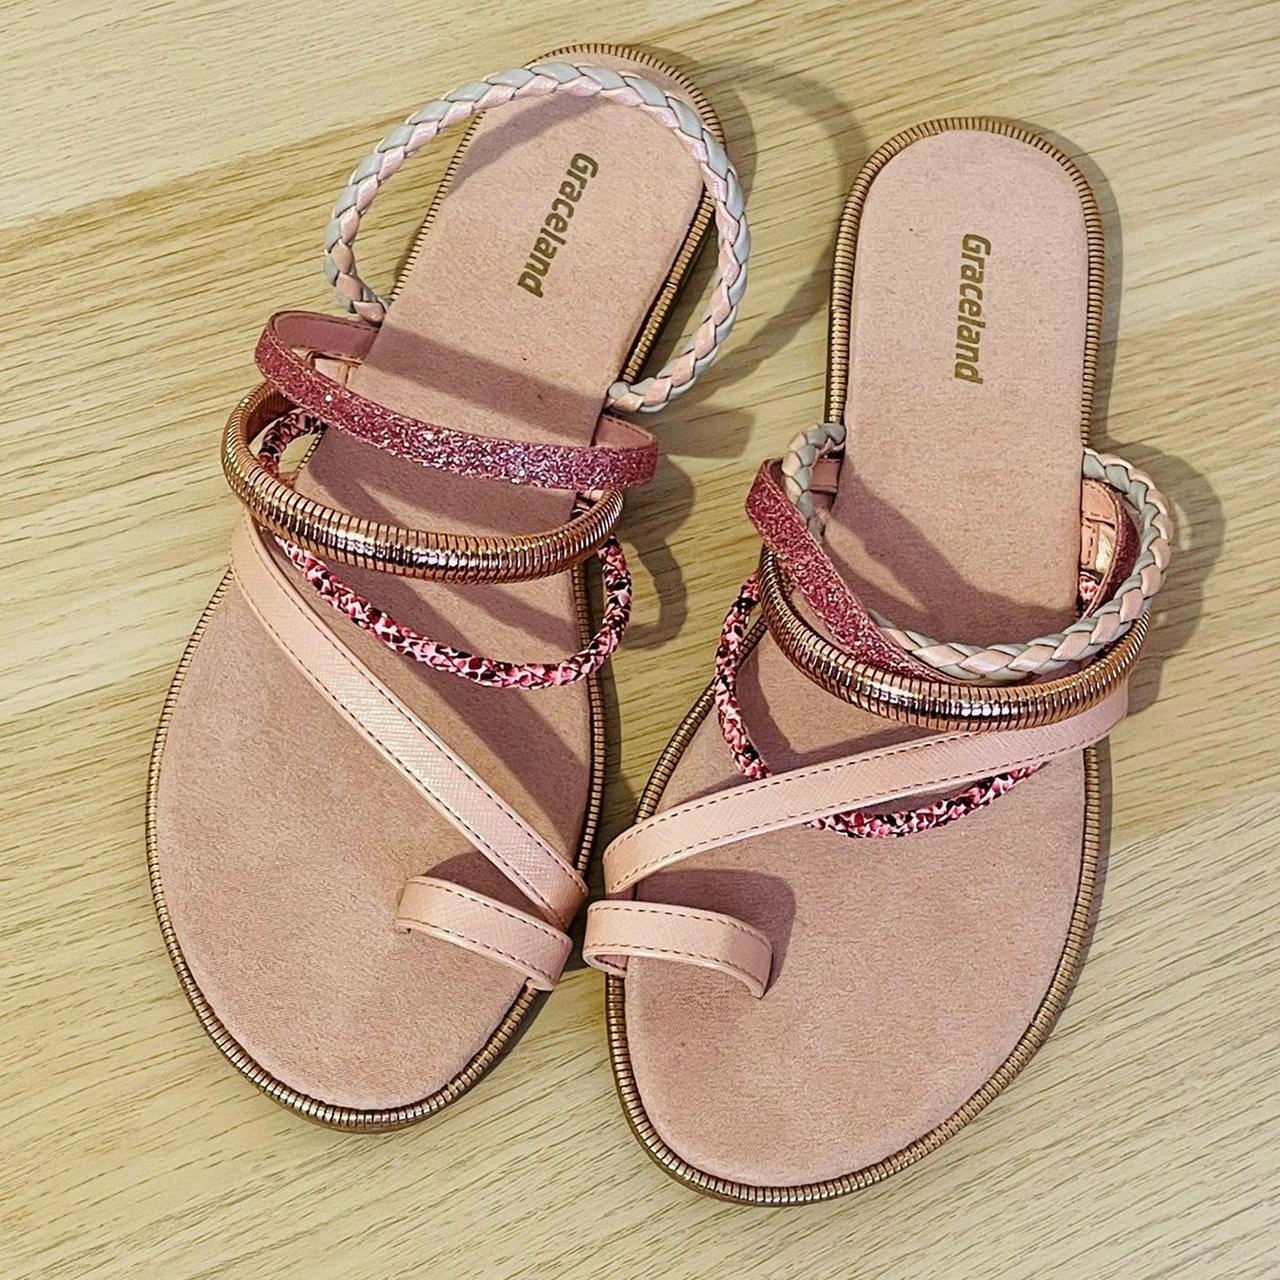 Graceland Pink Strappy Toe Post Sandals These are a... - Depop